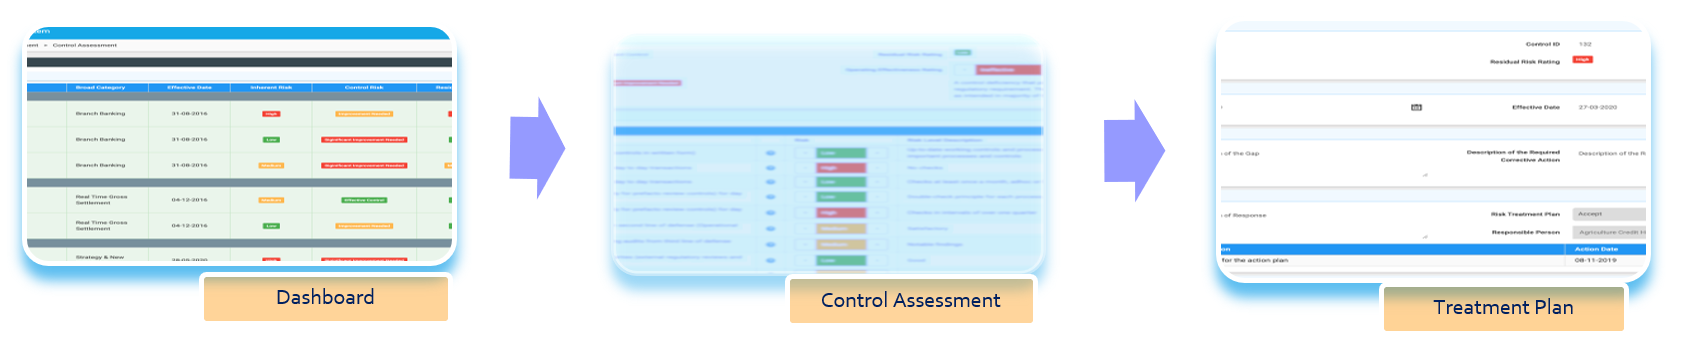 Control and Gap Assessment & Treatment Plan